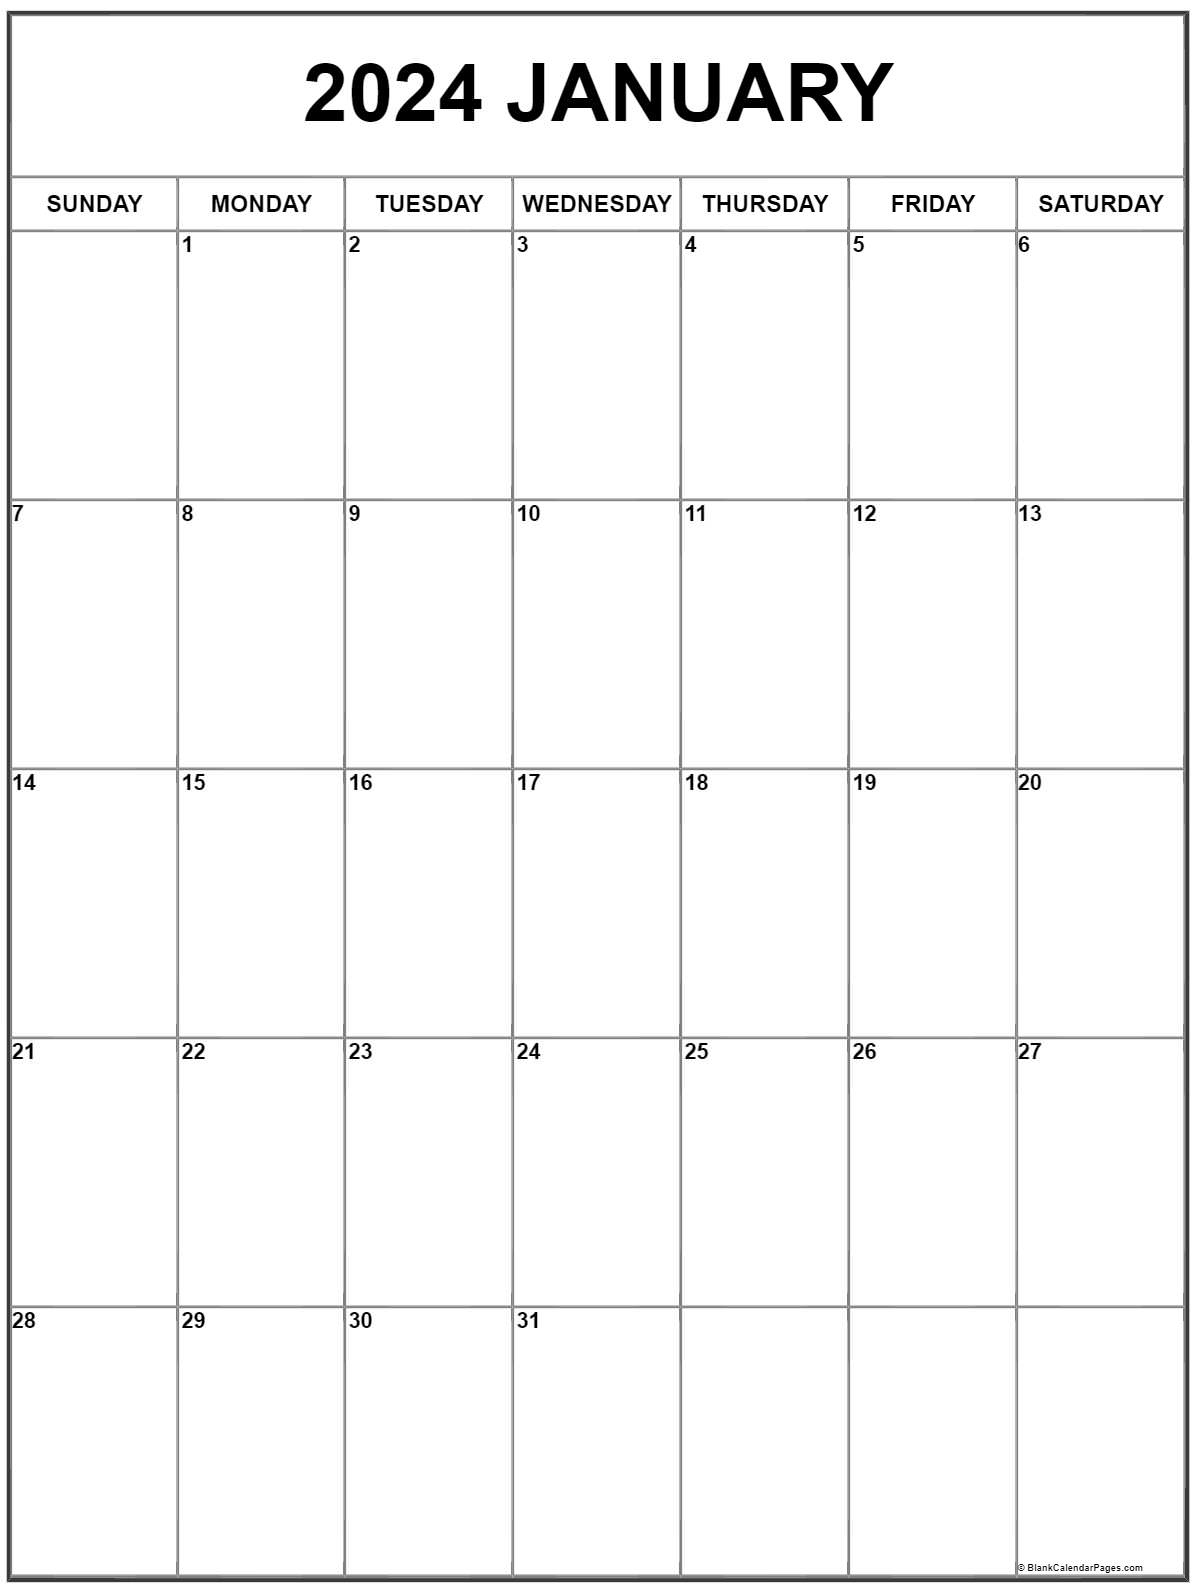 2024 Printable Calendar By Month Vertical Lotti Rhianon - Free Printable 2024 Monthly Calendar With Holidays Vertical